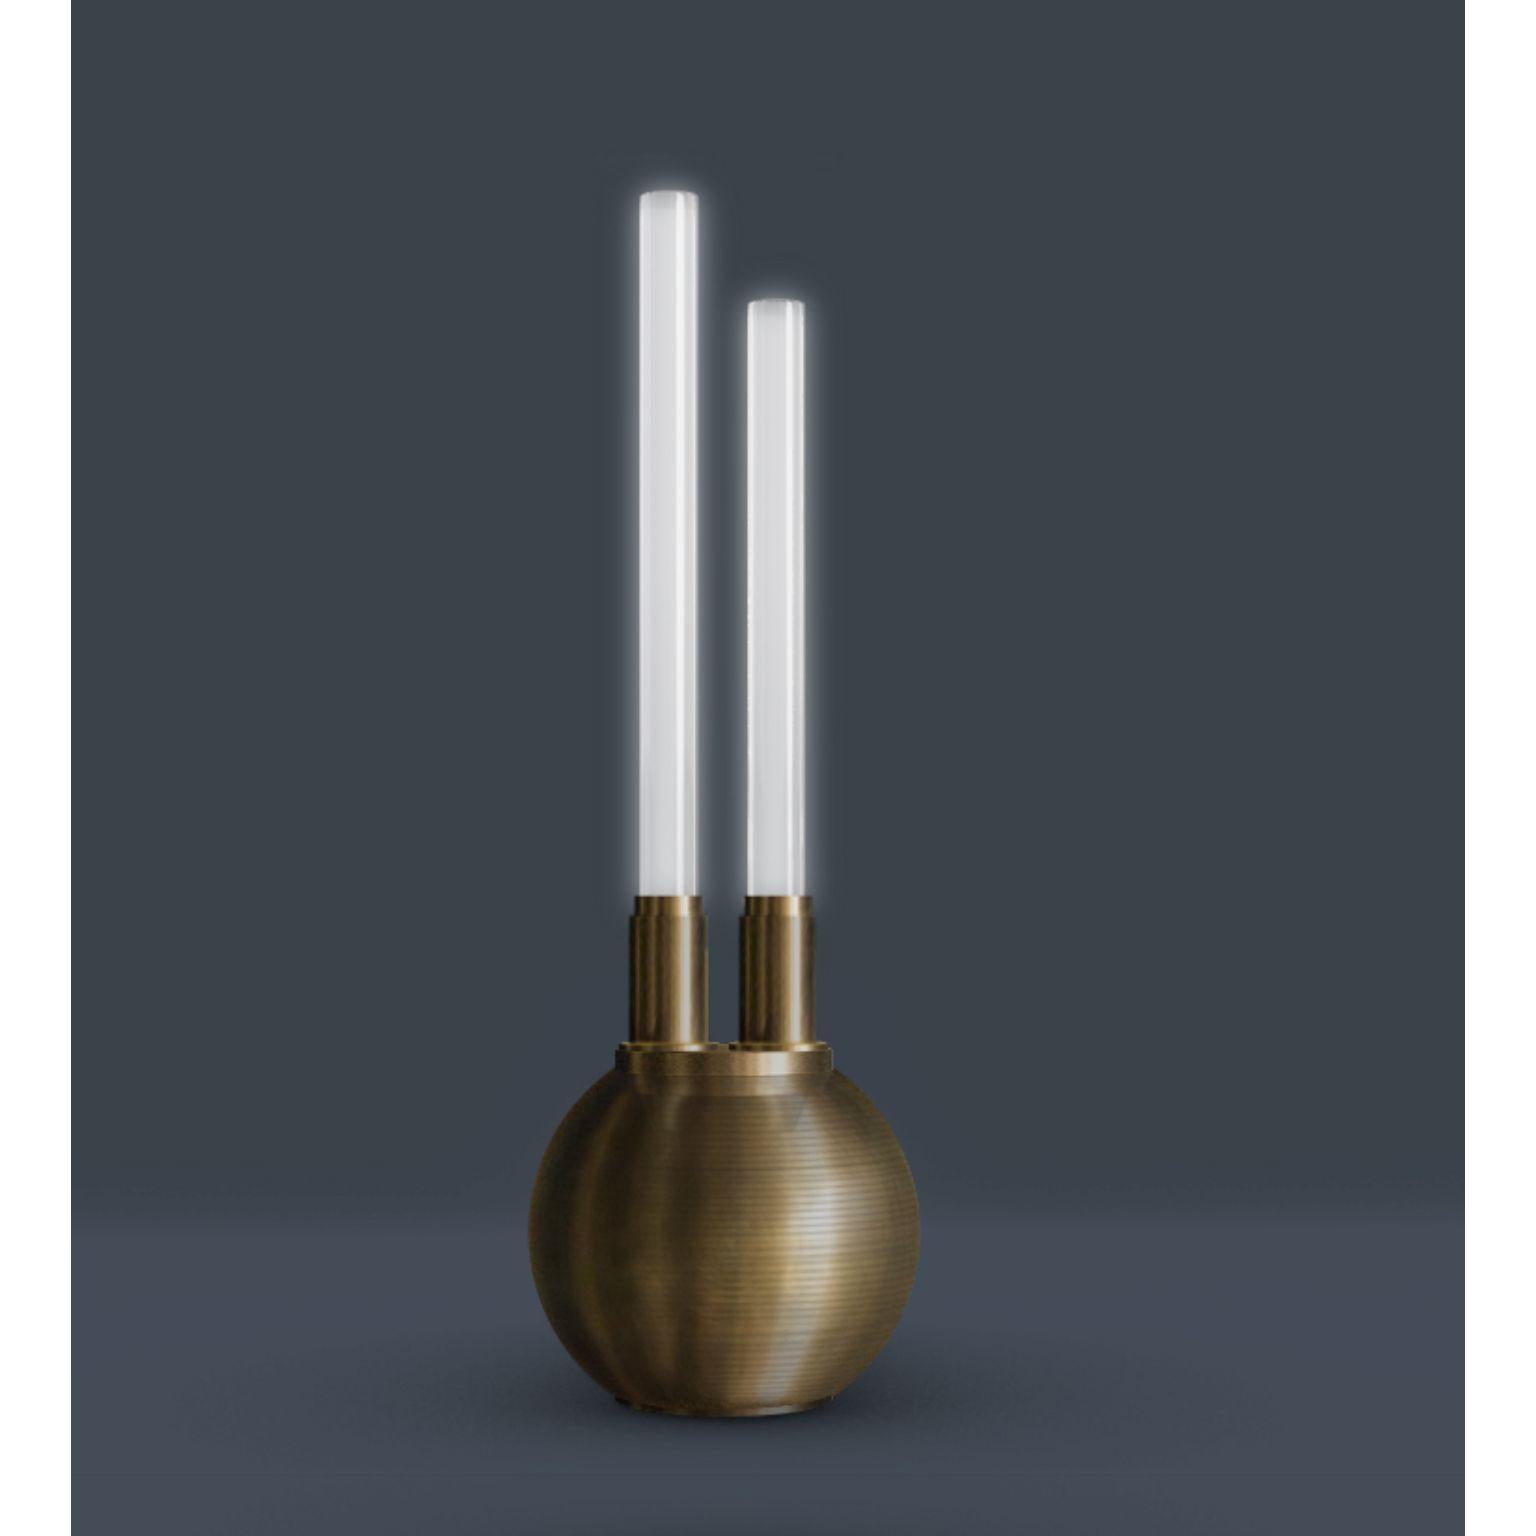 Omicron floor lamp, Jan Garncarek
Dimensions: 40 x 127 cm
Material: Raw brass, frozen glass
Handcrafted by Jan Garncarek.
Signed 

Information: 
weight: 15 kg / 33 lb
voltage: 120V, 240V
lamping: 2 X 1 2 W dimmable LED module
lumens: 800